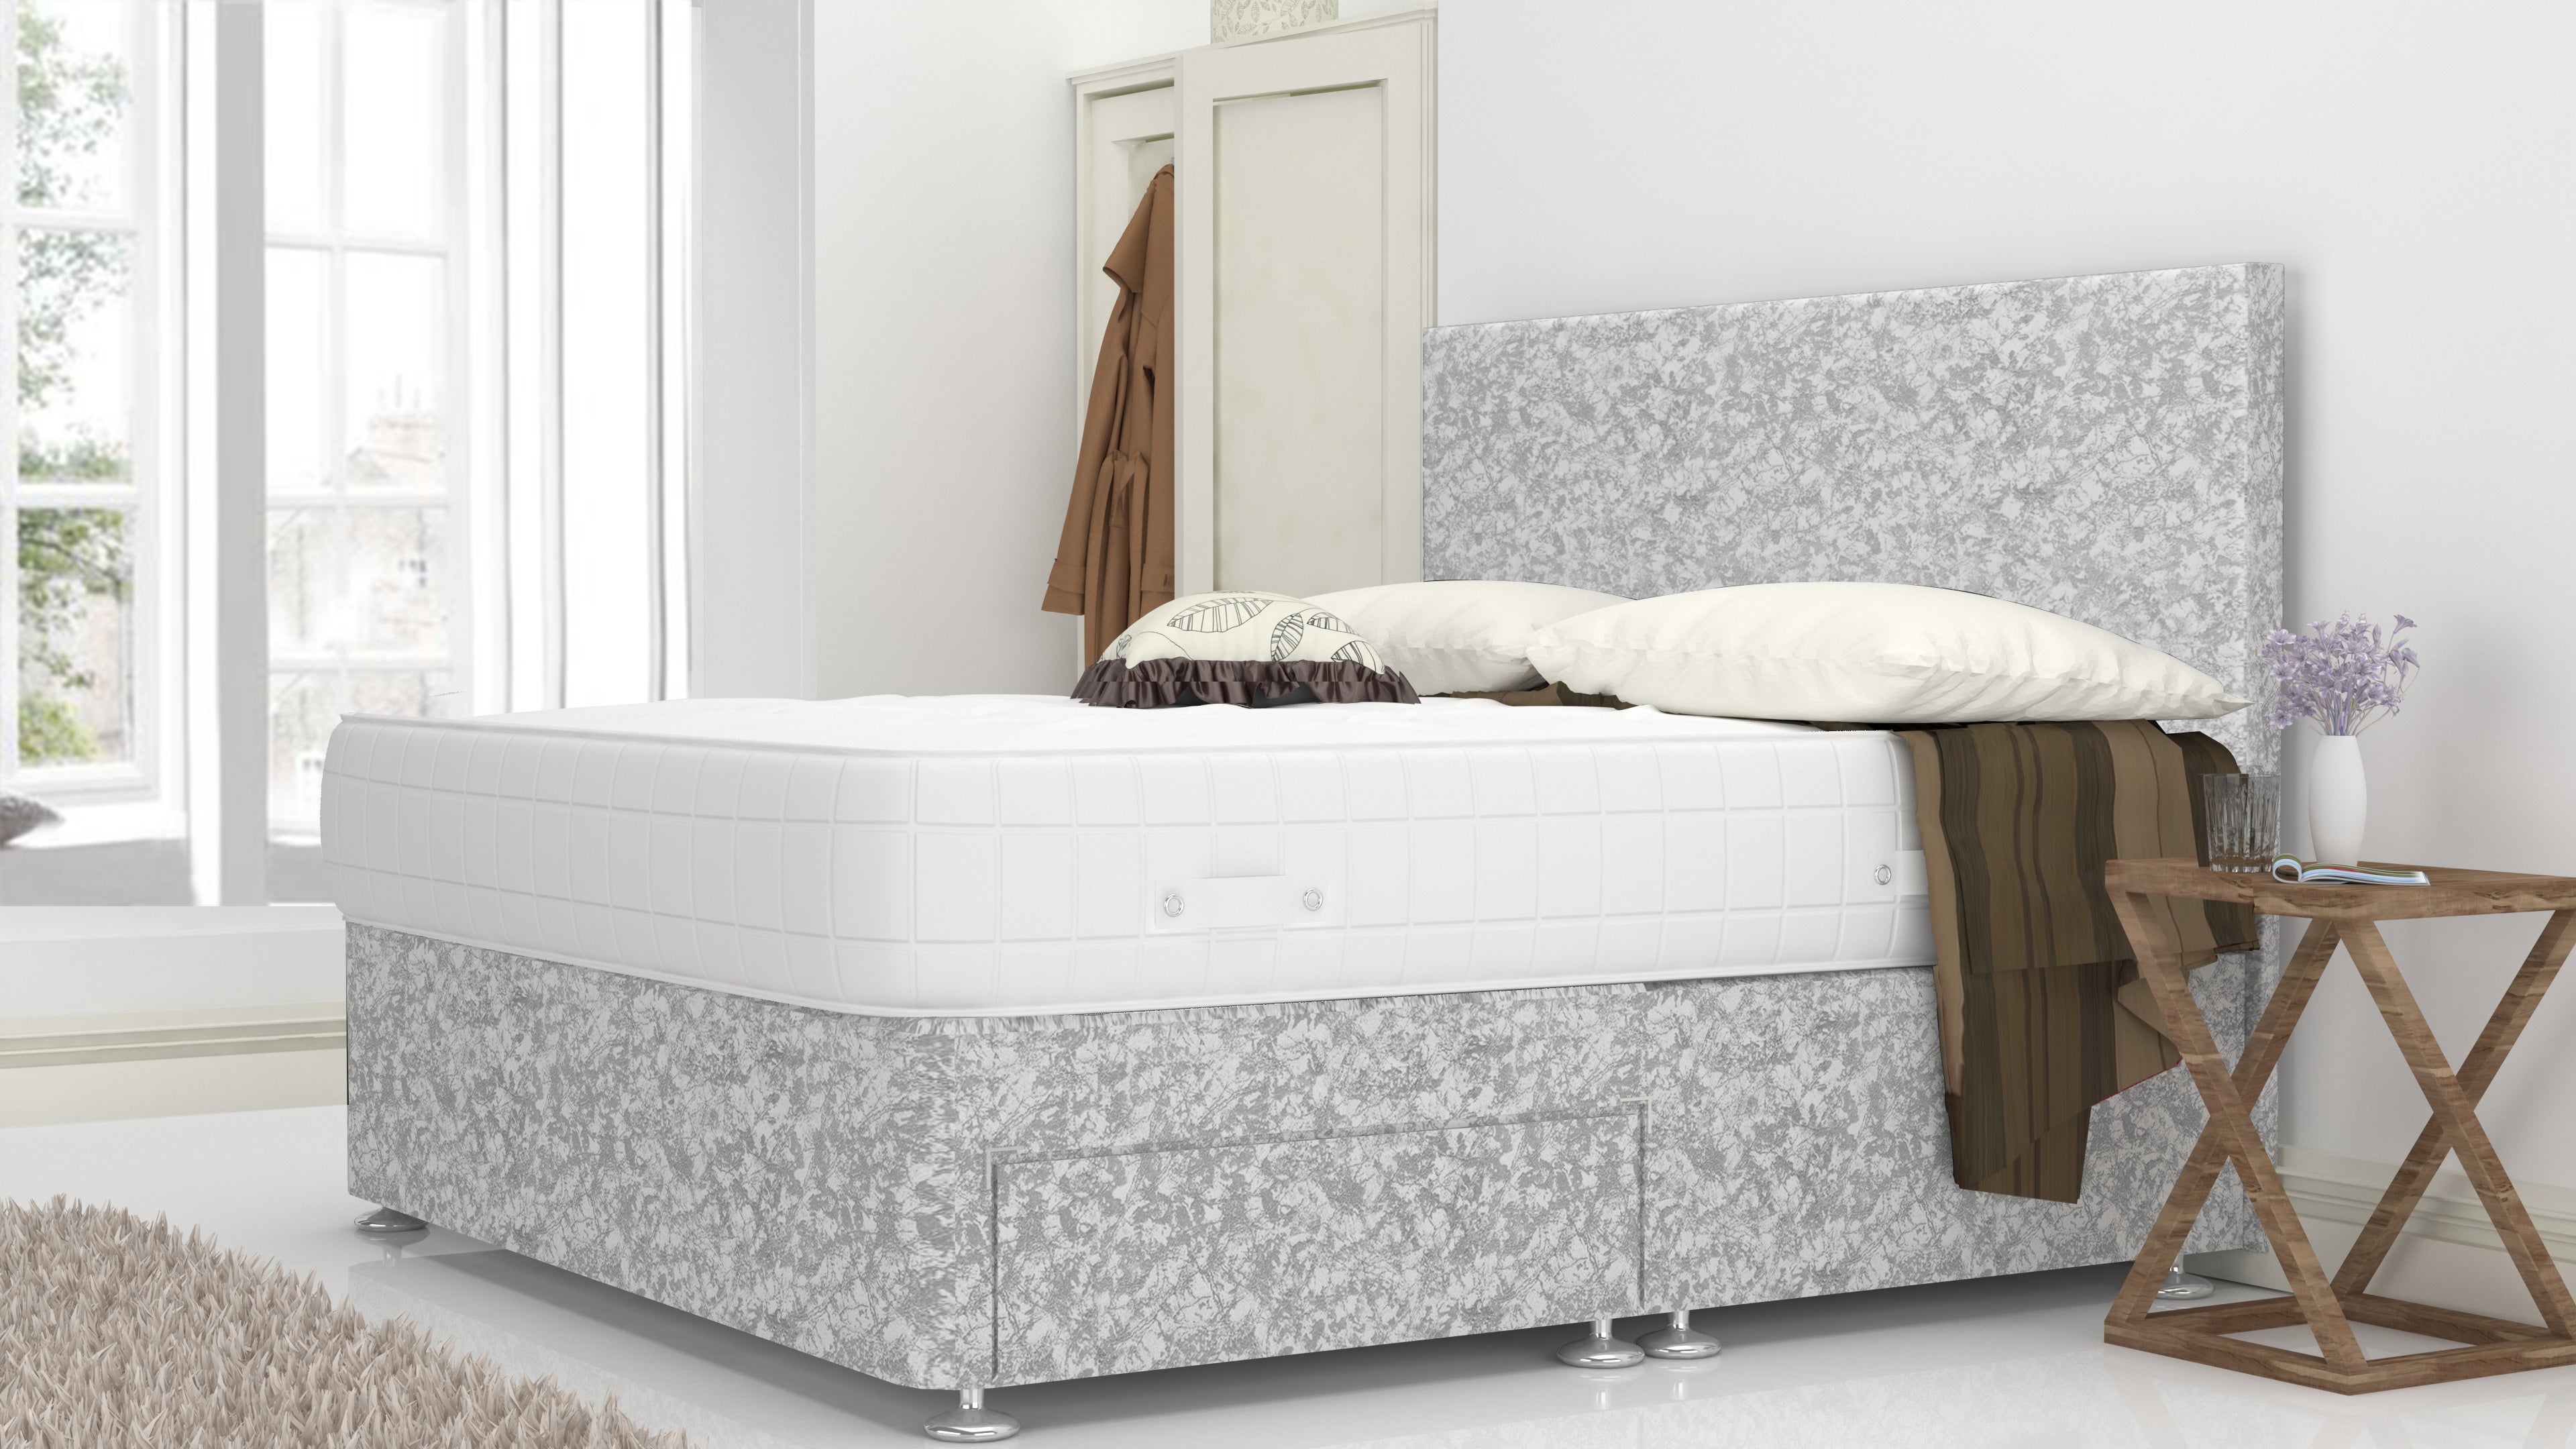 Silver Crushed 6 Feet Divan Bed Set With Plain Headboard Option (Included Feet) And Free Memory Foam Mattress